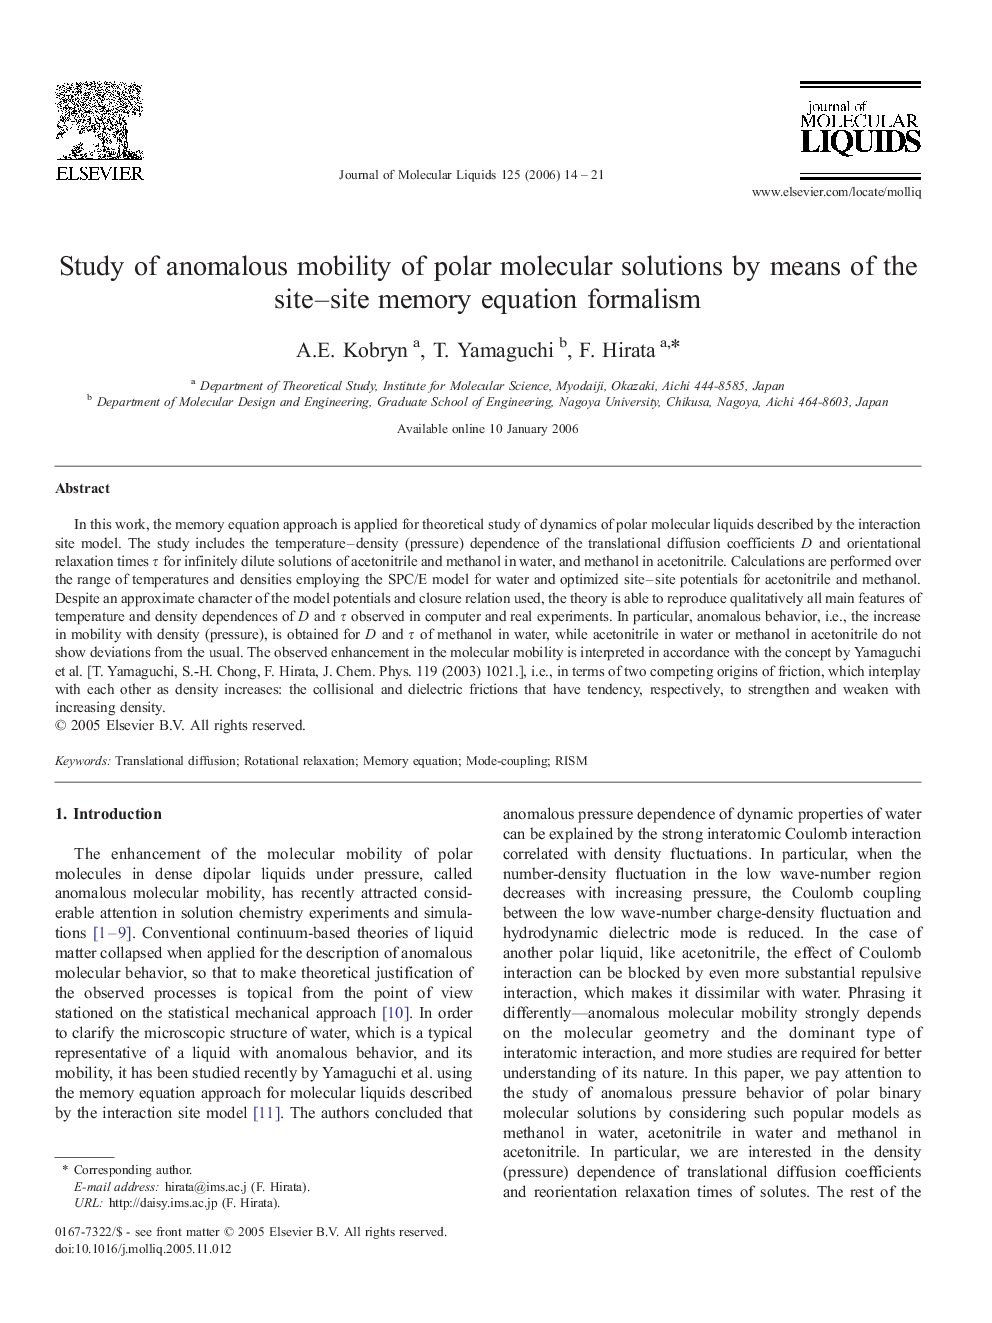 Study of anomalous mobility of polar molecular solutions by means of the site-site memory equation formalism